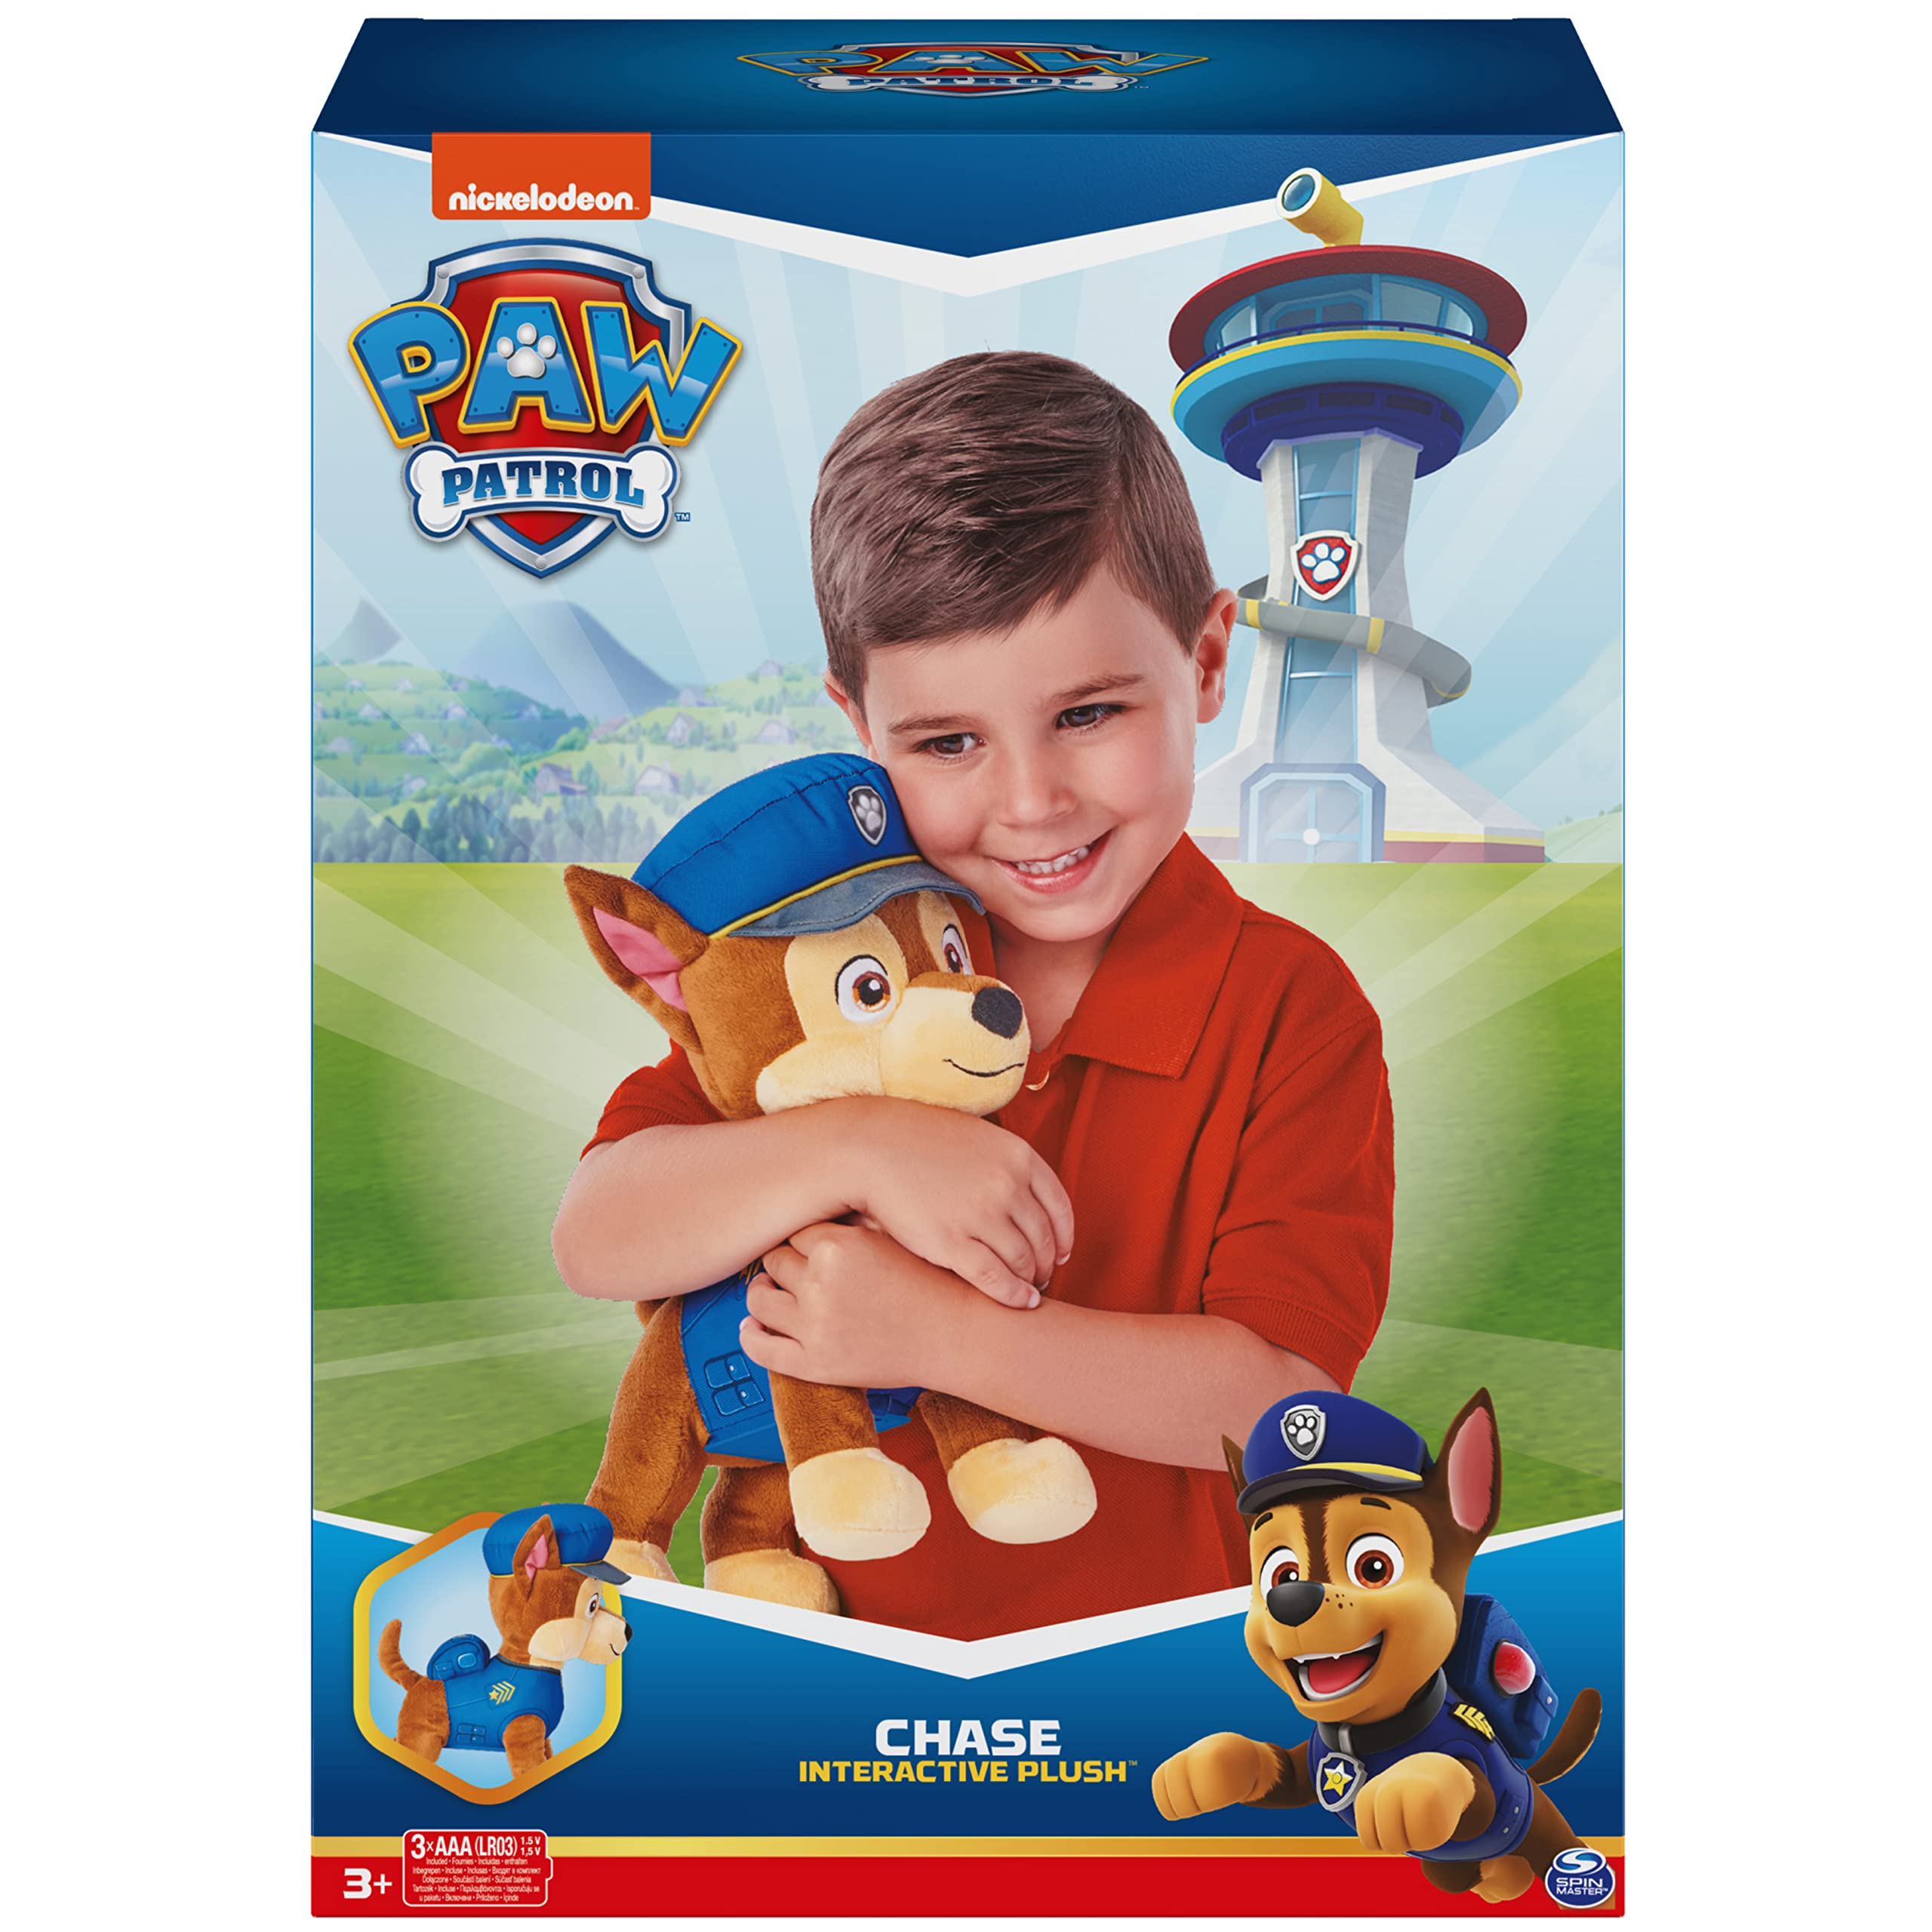 Paw Patrol, Talking Chase 12-Inch-Tall Interactive Plush Toys with Sounds, Phrases and Wagging Tail, Stuffed Animals, Kids Toys for Ages 3 and up